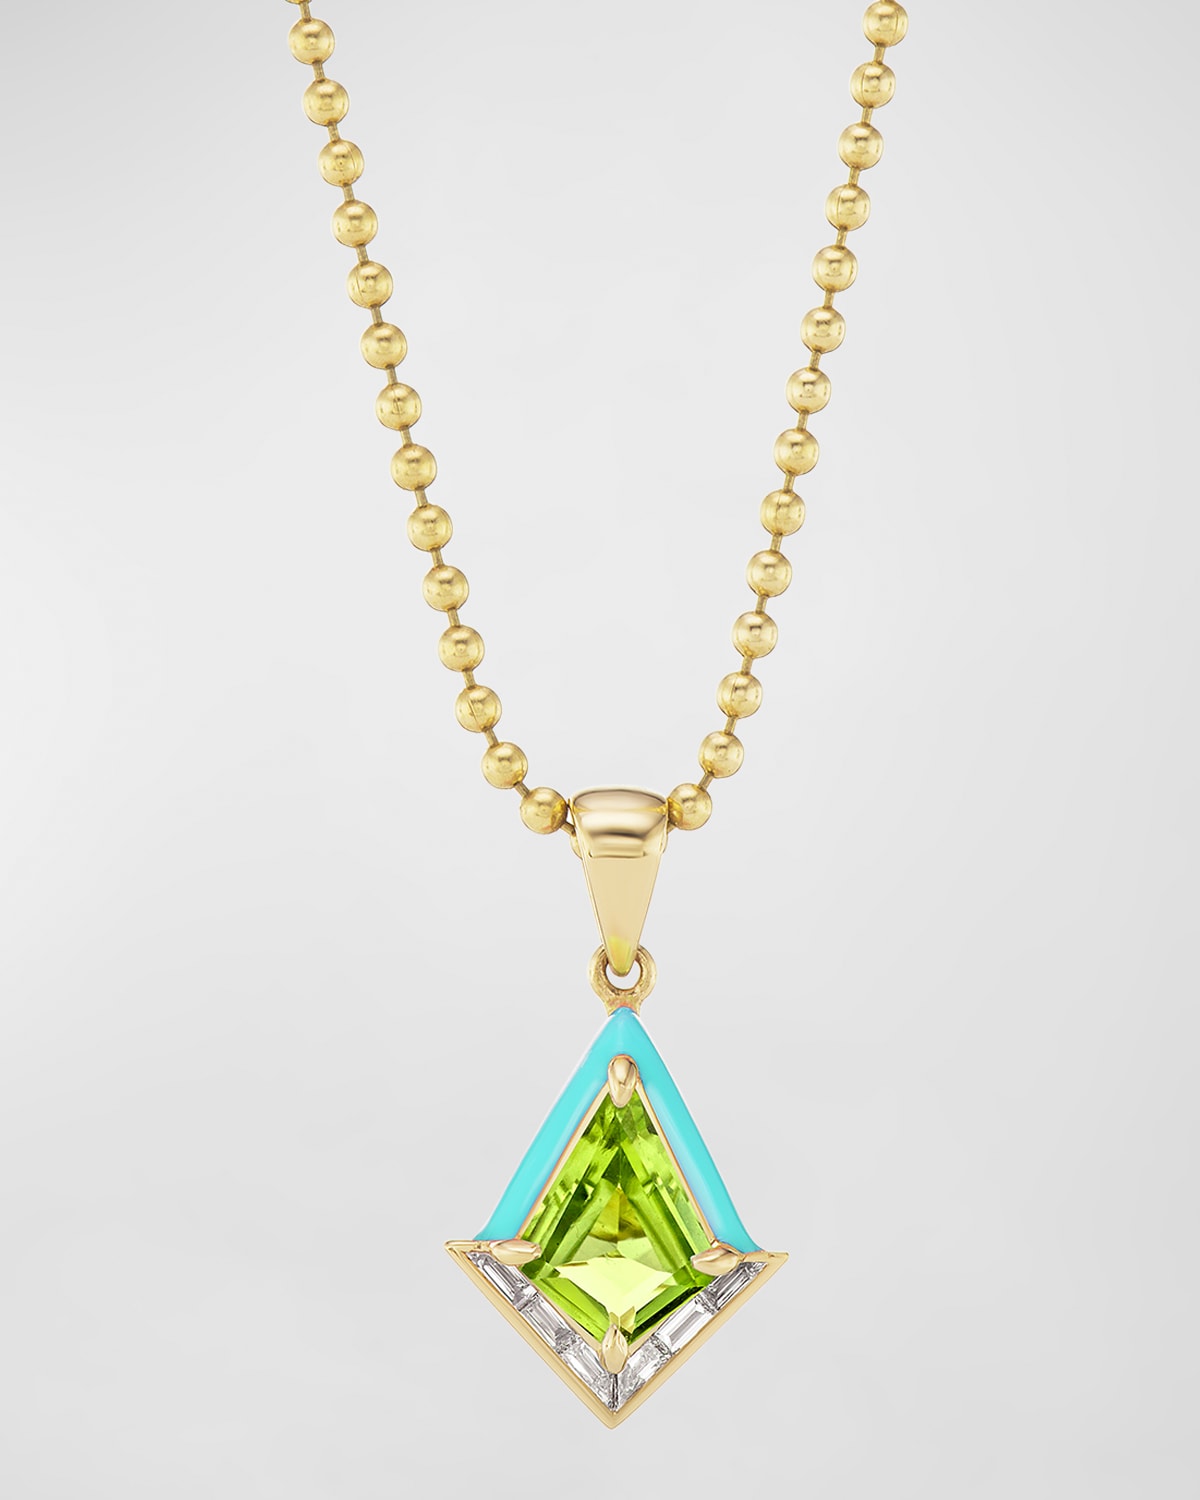 Twinkle Necklace in 18K Yellow Gold and Peridot 16"L